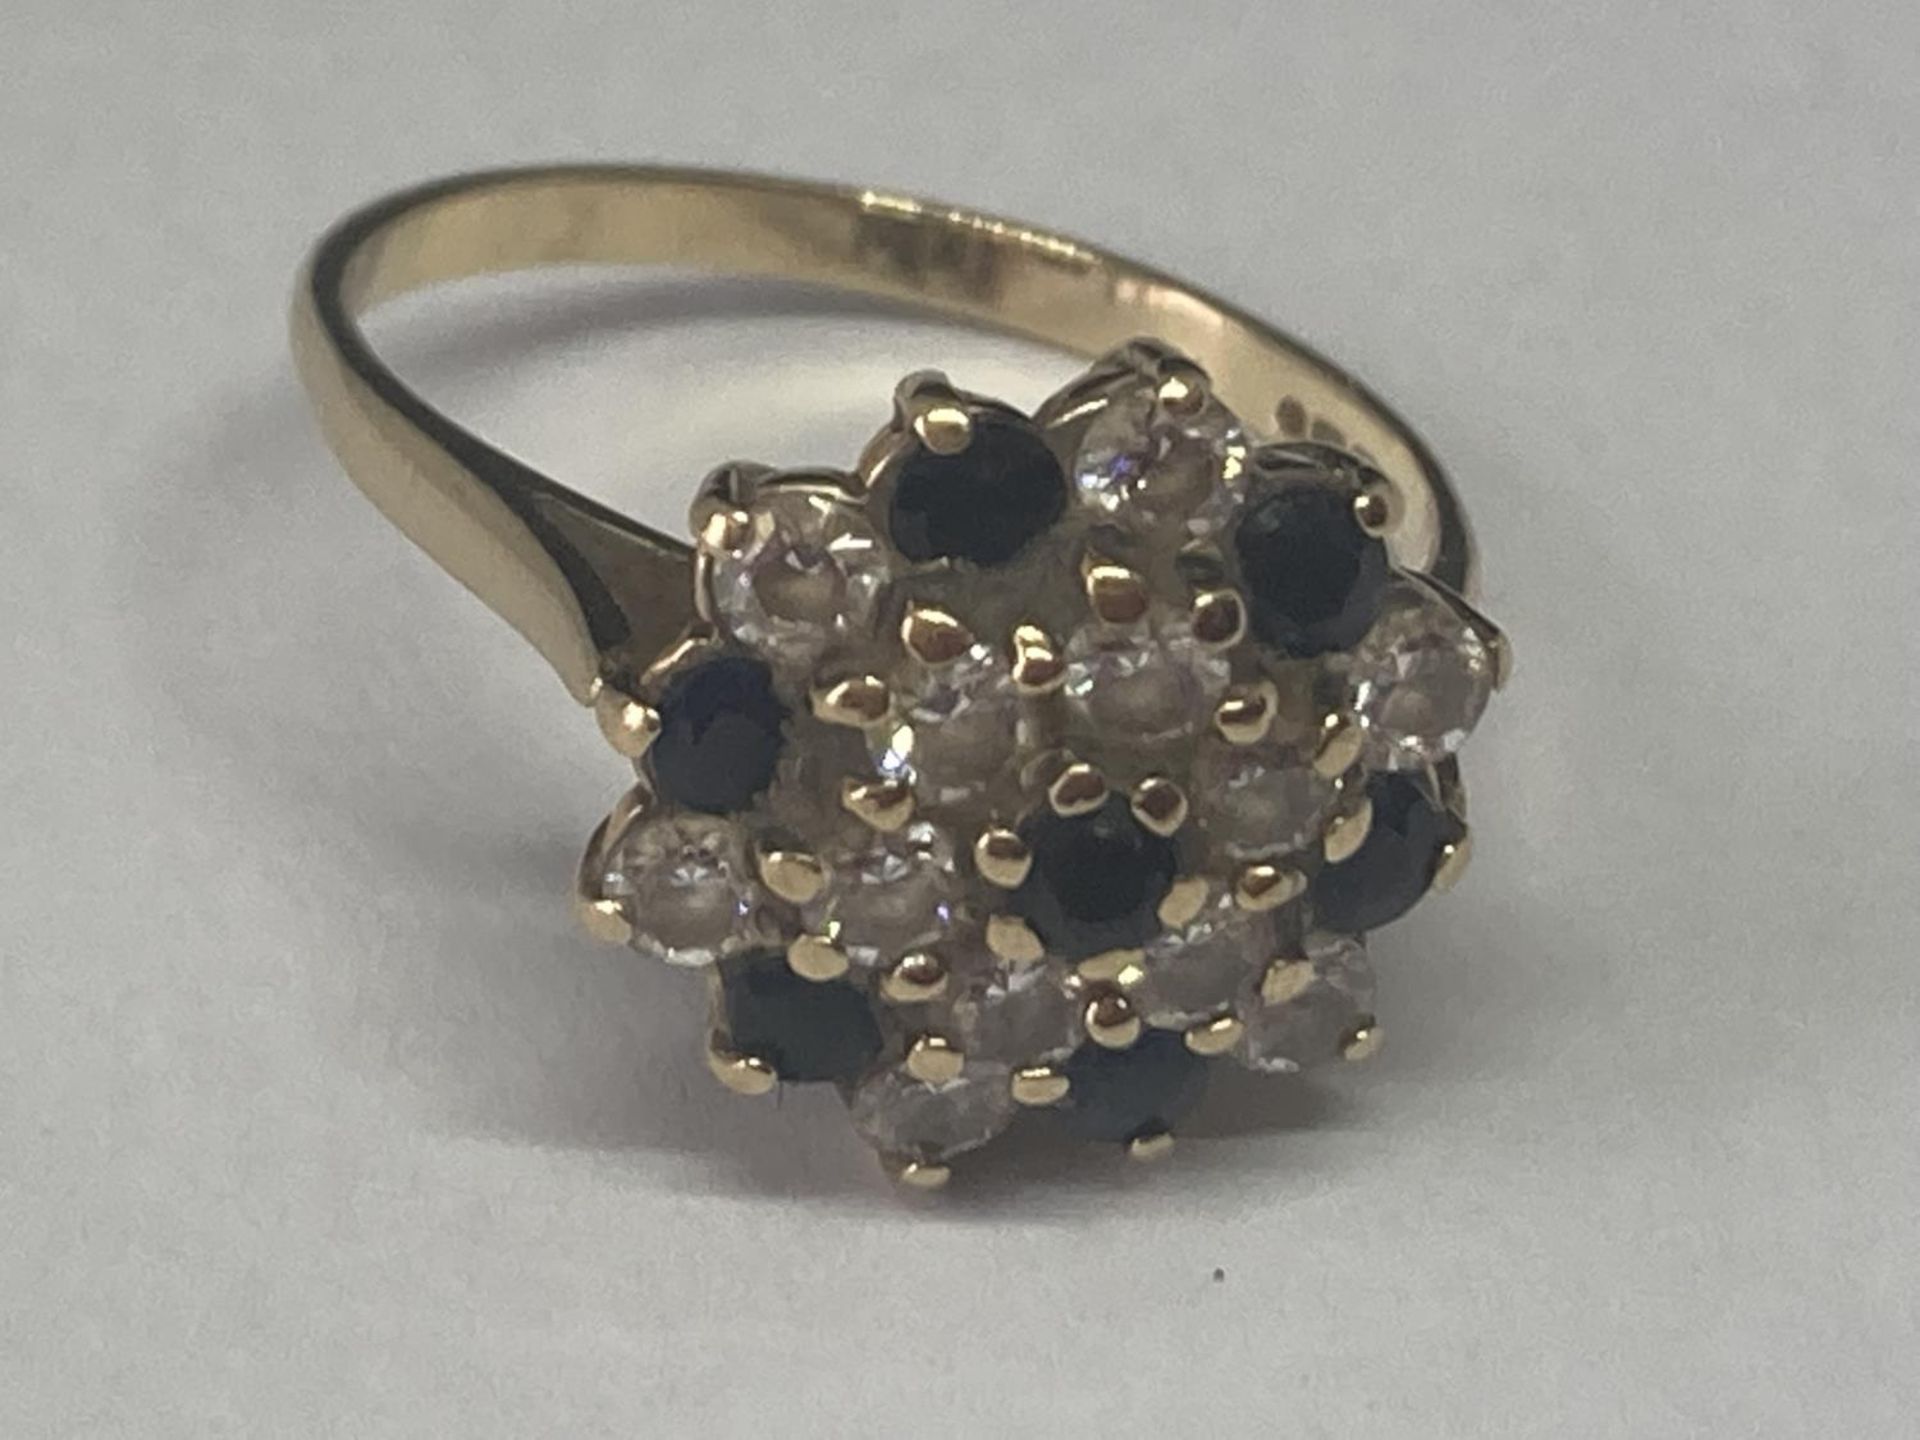 A 9 CARAT GOLD RING WITH SAPPHIRE AND CUBIC ZIRCONIAS IN A CLUSTER DESIGN SIZE M/N